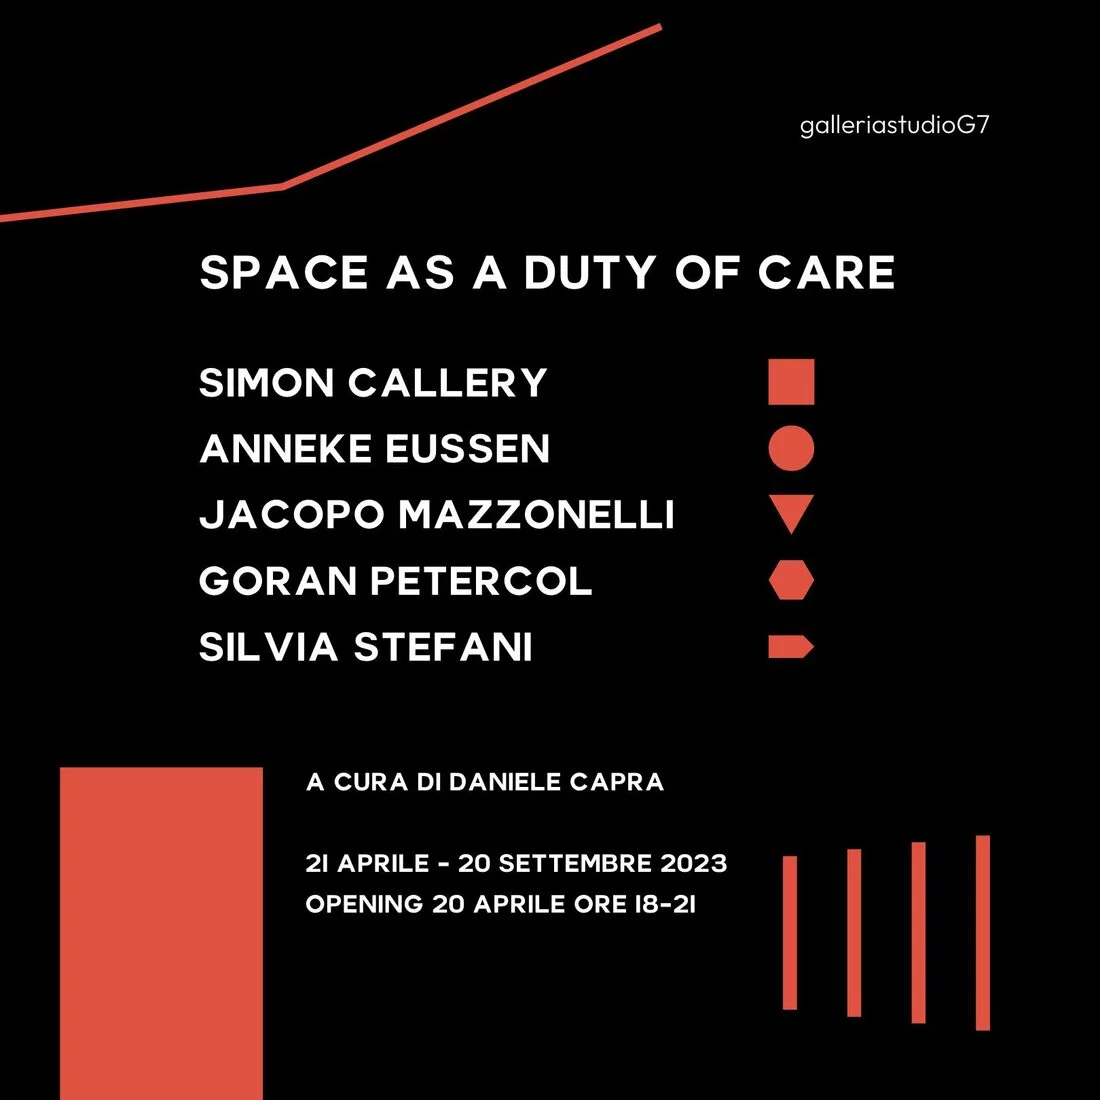 Space as a duty of care